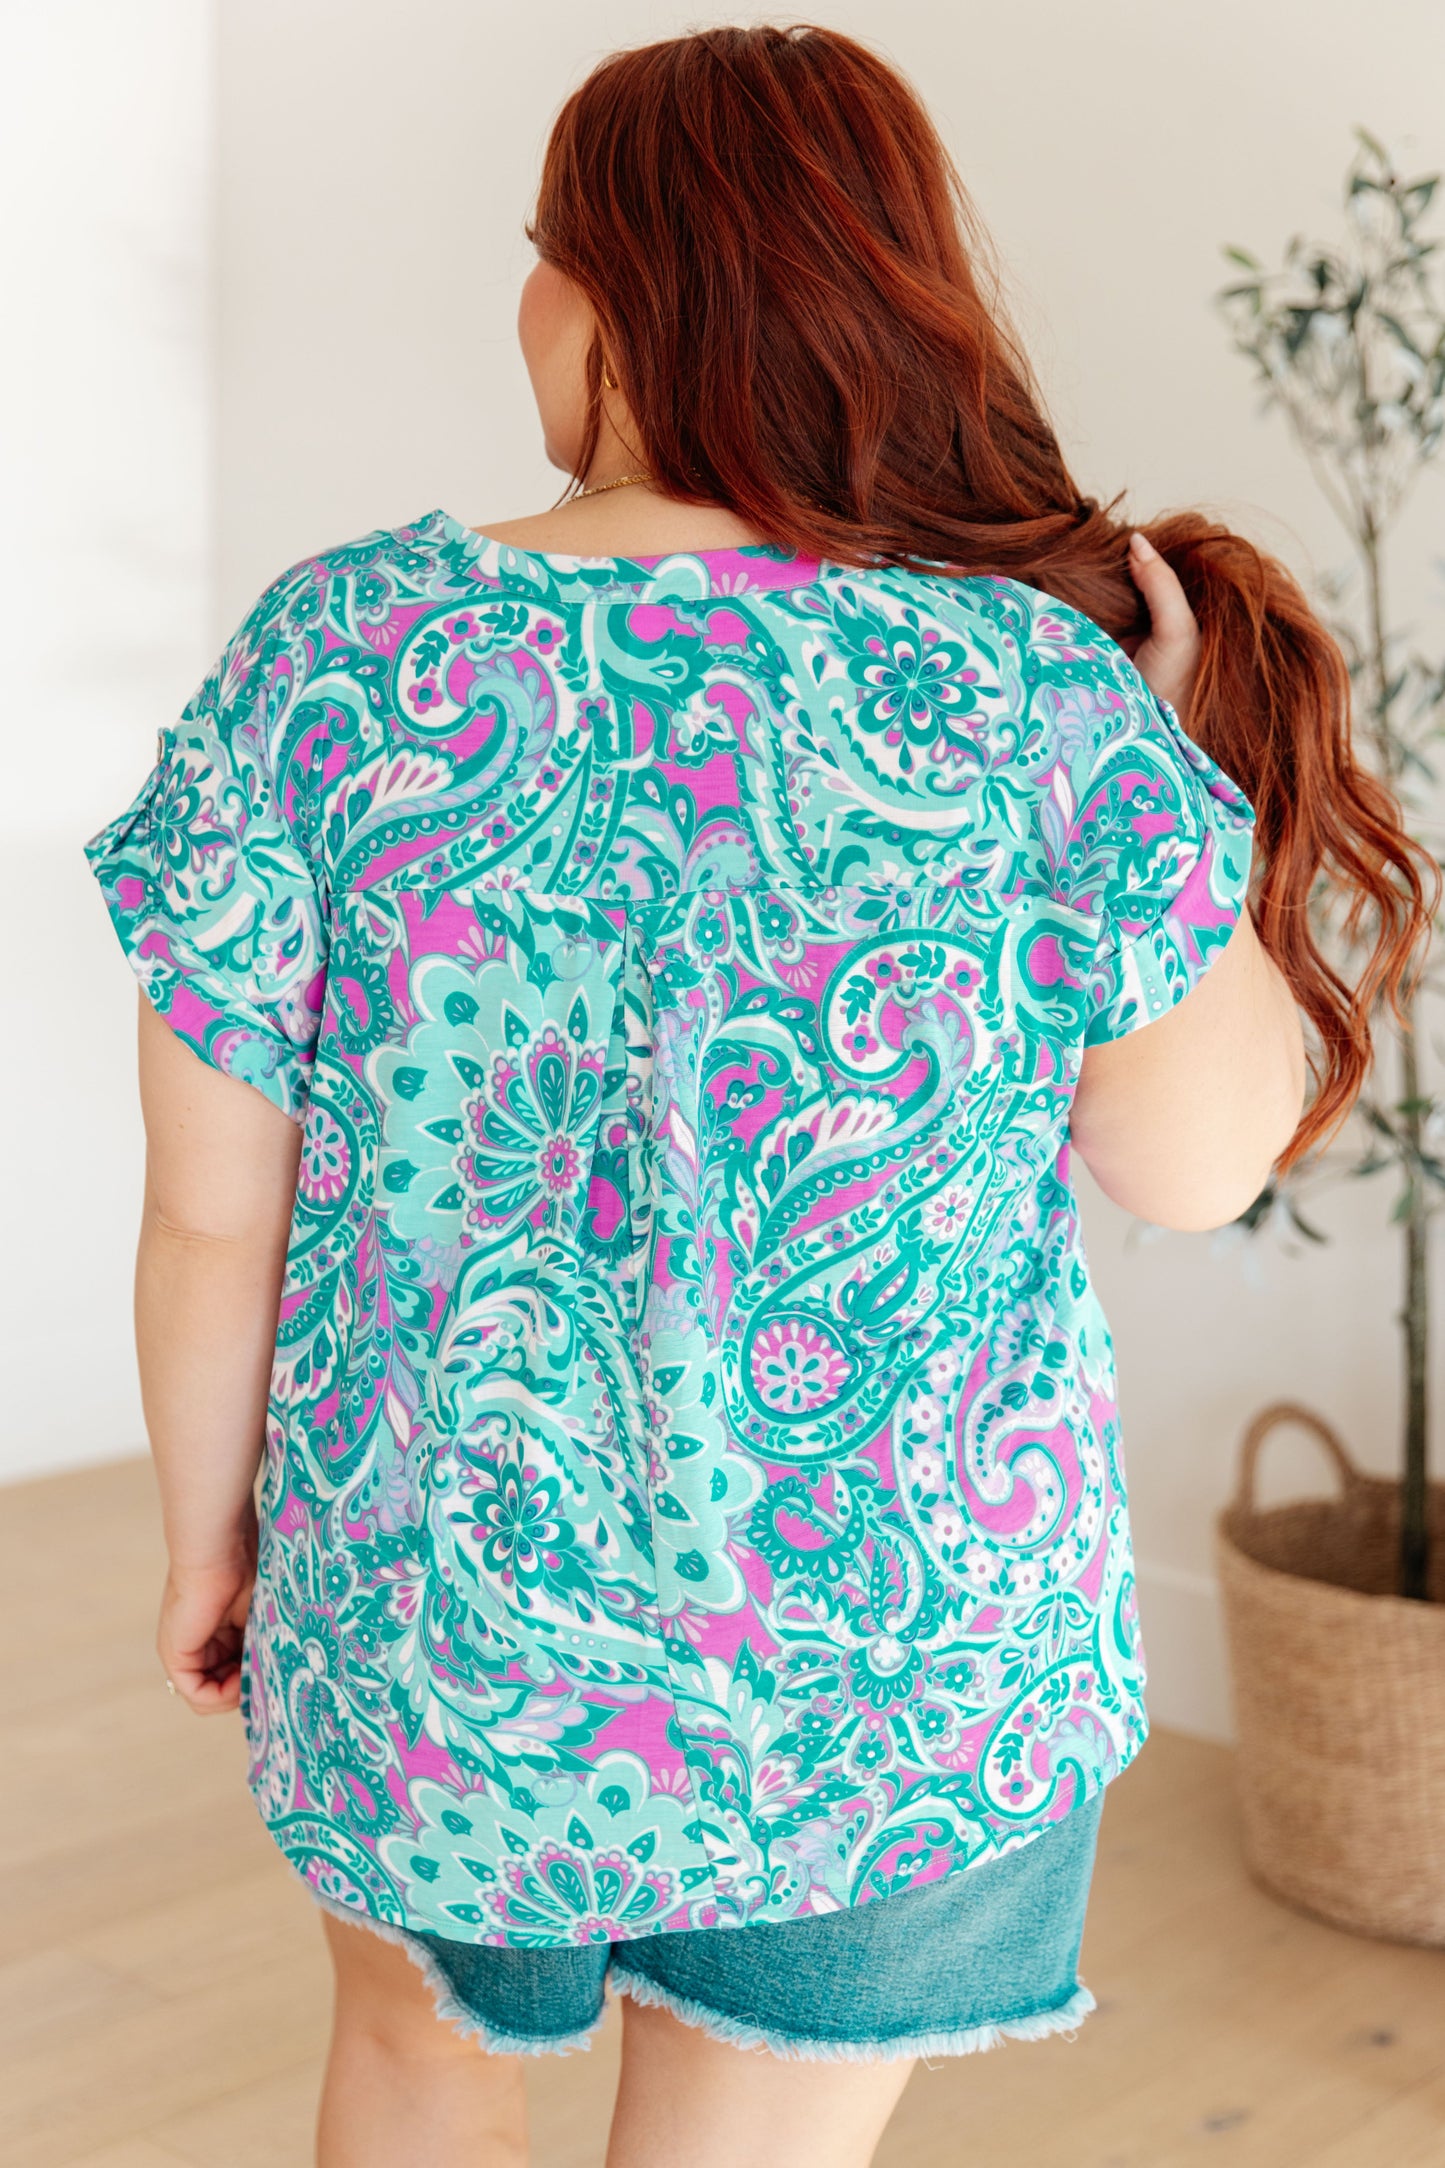 Lizzy Cap Sleeve Top in Magenta and Teal Paisley (Online Exclusive)